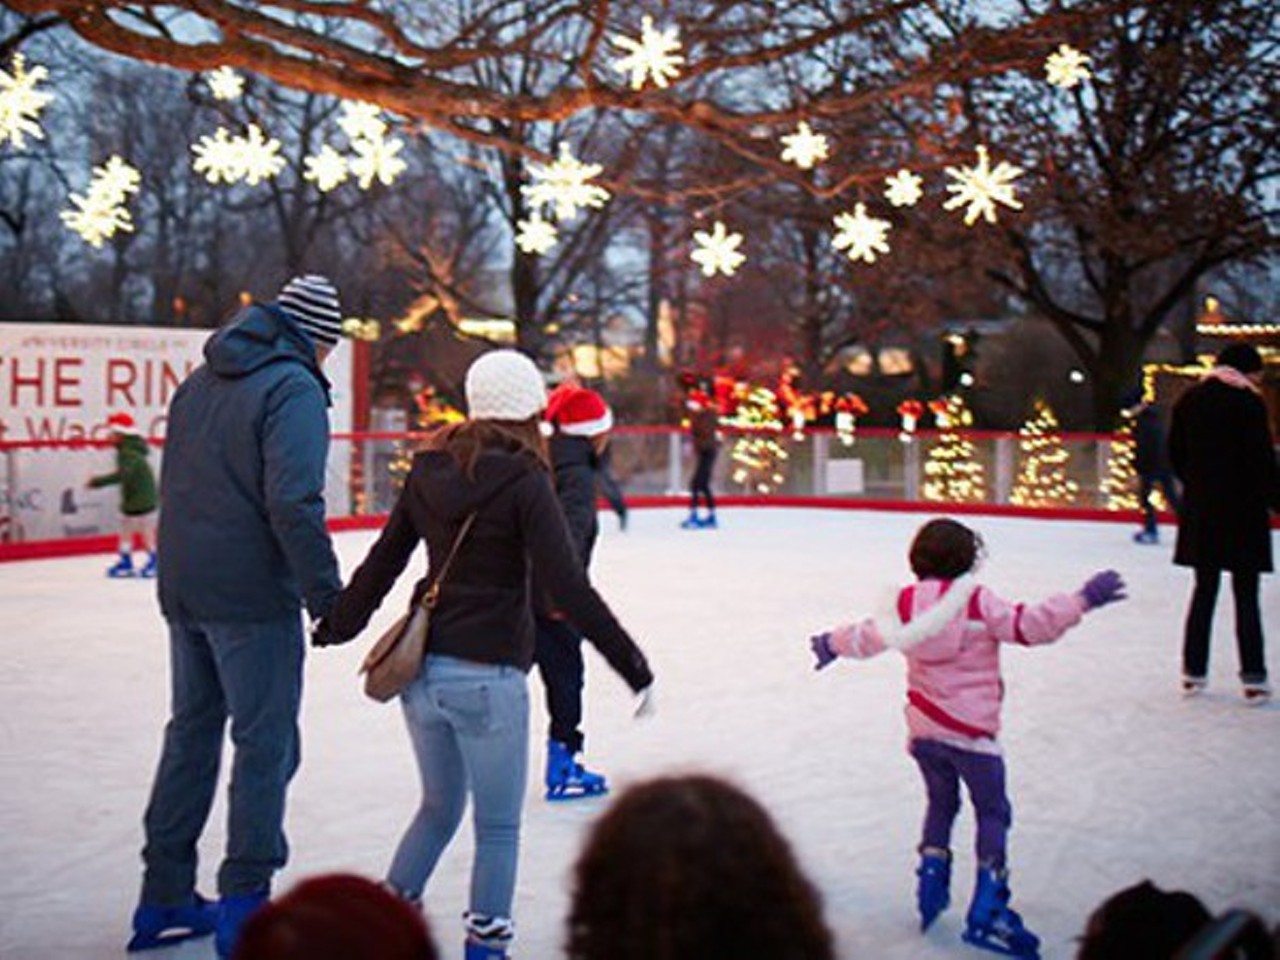  Ice Skate at Wade Oval
10820 East Blvd., Cleveland
From now until March 4, one of the most cliched date pastimes returns to Cleveland; Ice skating outdoors, under the twinkle of fairy lights and snow drifts. Wade Oval at University Circle offers free skating for all with $3 skate rentals. 
Photo via Scene&#146;s archives